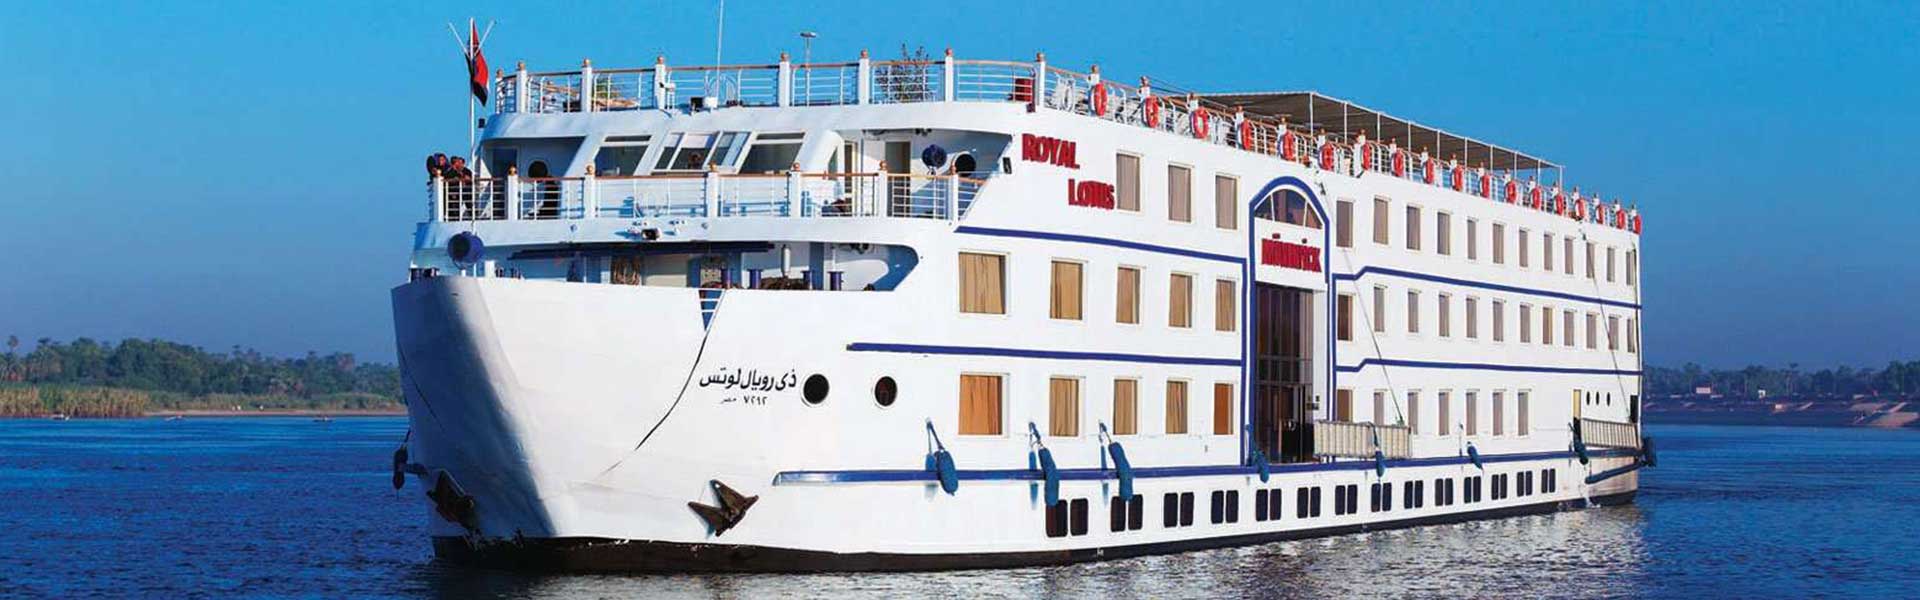 Movenpick MS Royal Lotus Nile Cruise 5 Days From Luxor